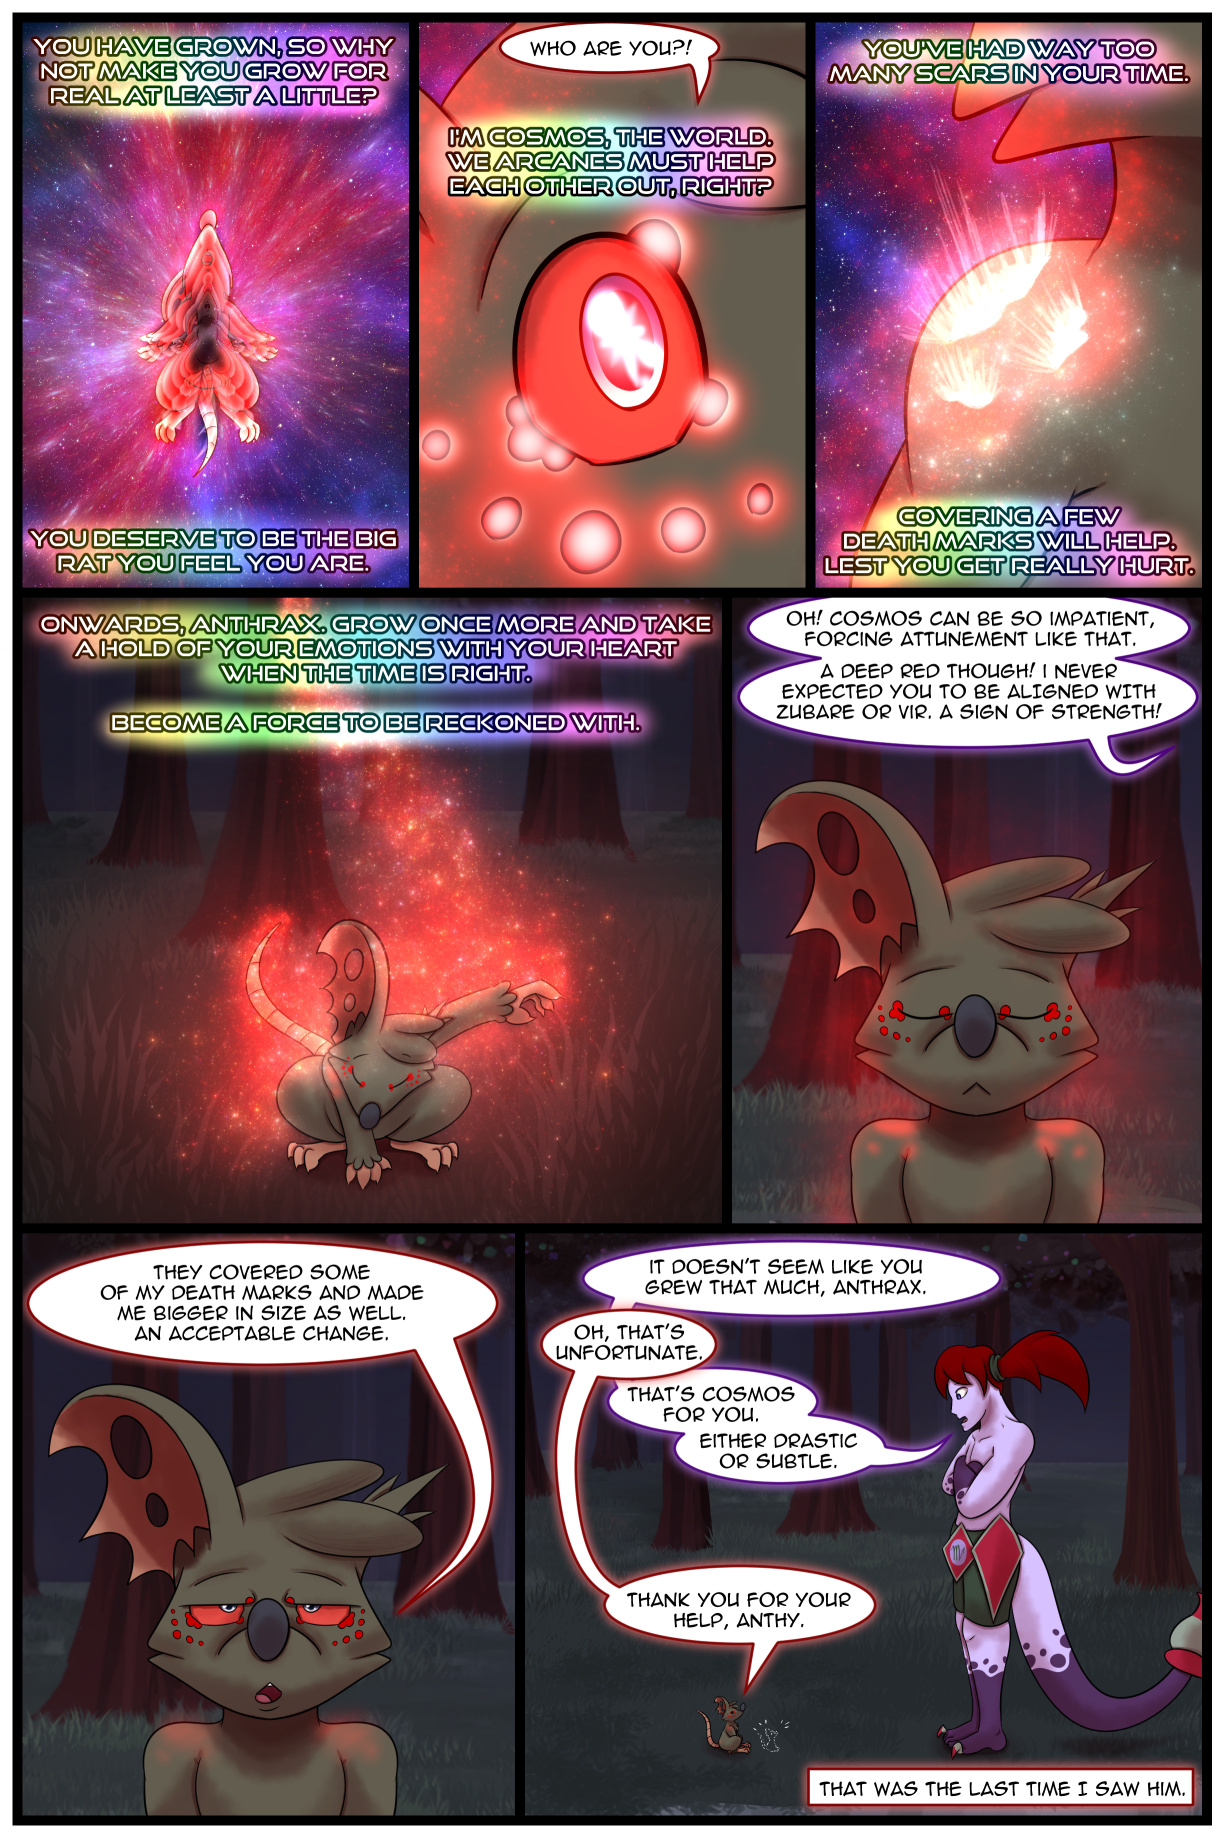 Ch5 Page 50 – Cosmos